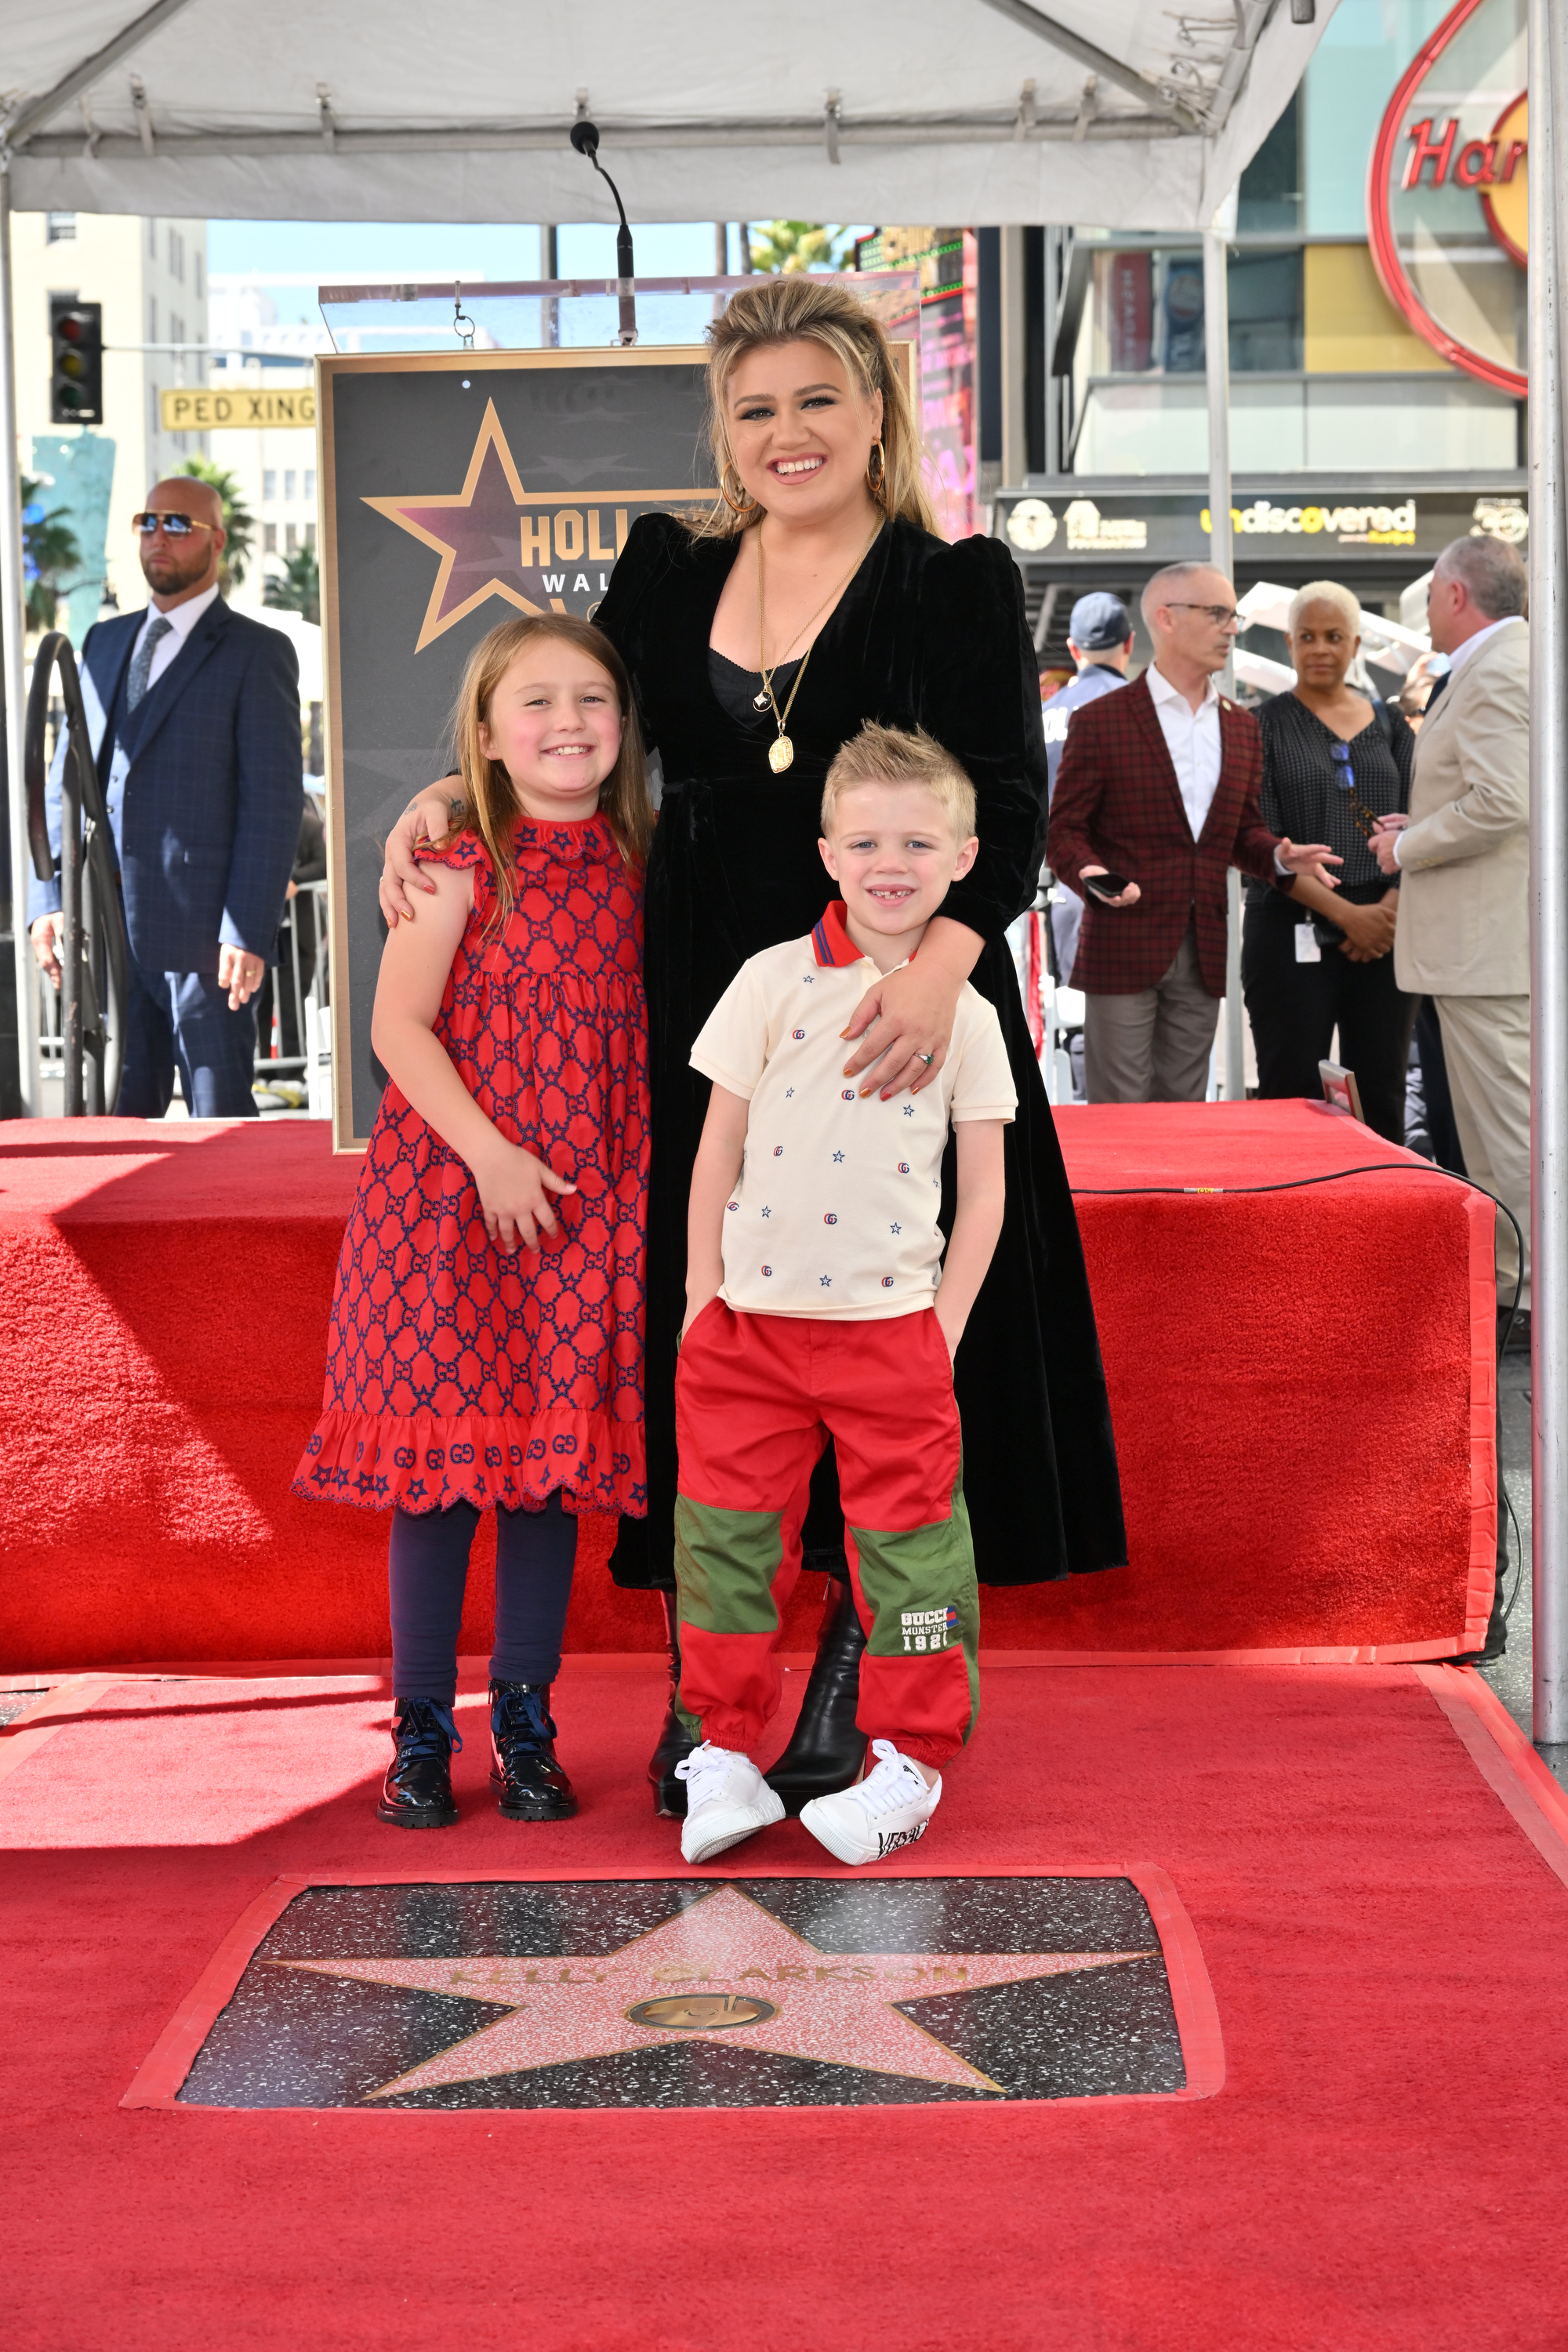 Kelly Clarkson and her children River Blackstock and Remington Blackstock pose during the Star Ceremony for Kelly Clarkson on the Hollywood Walk of Fame on September 19, 2022 in Los Angeles, California | Source: Getty Images